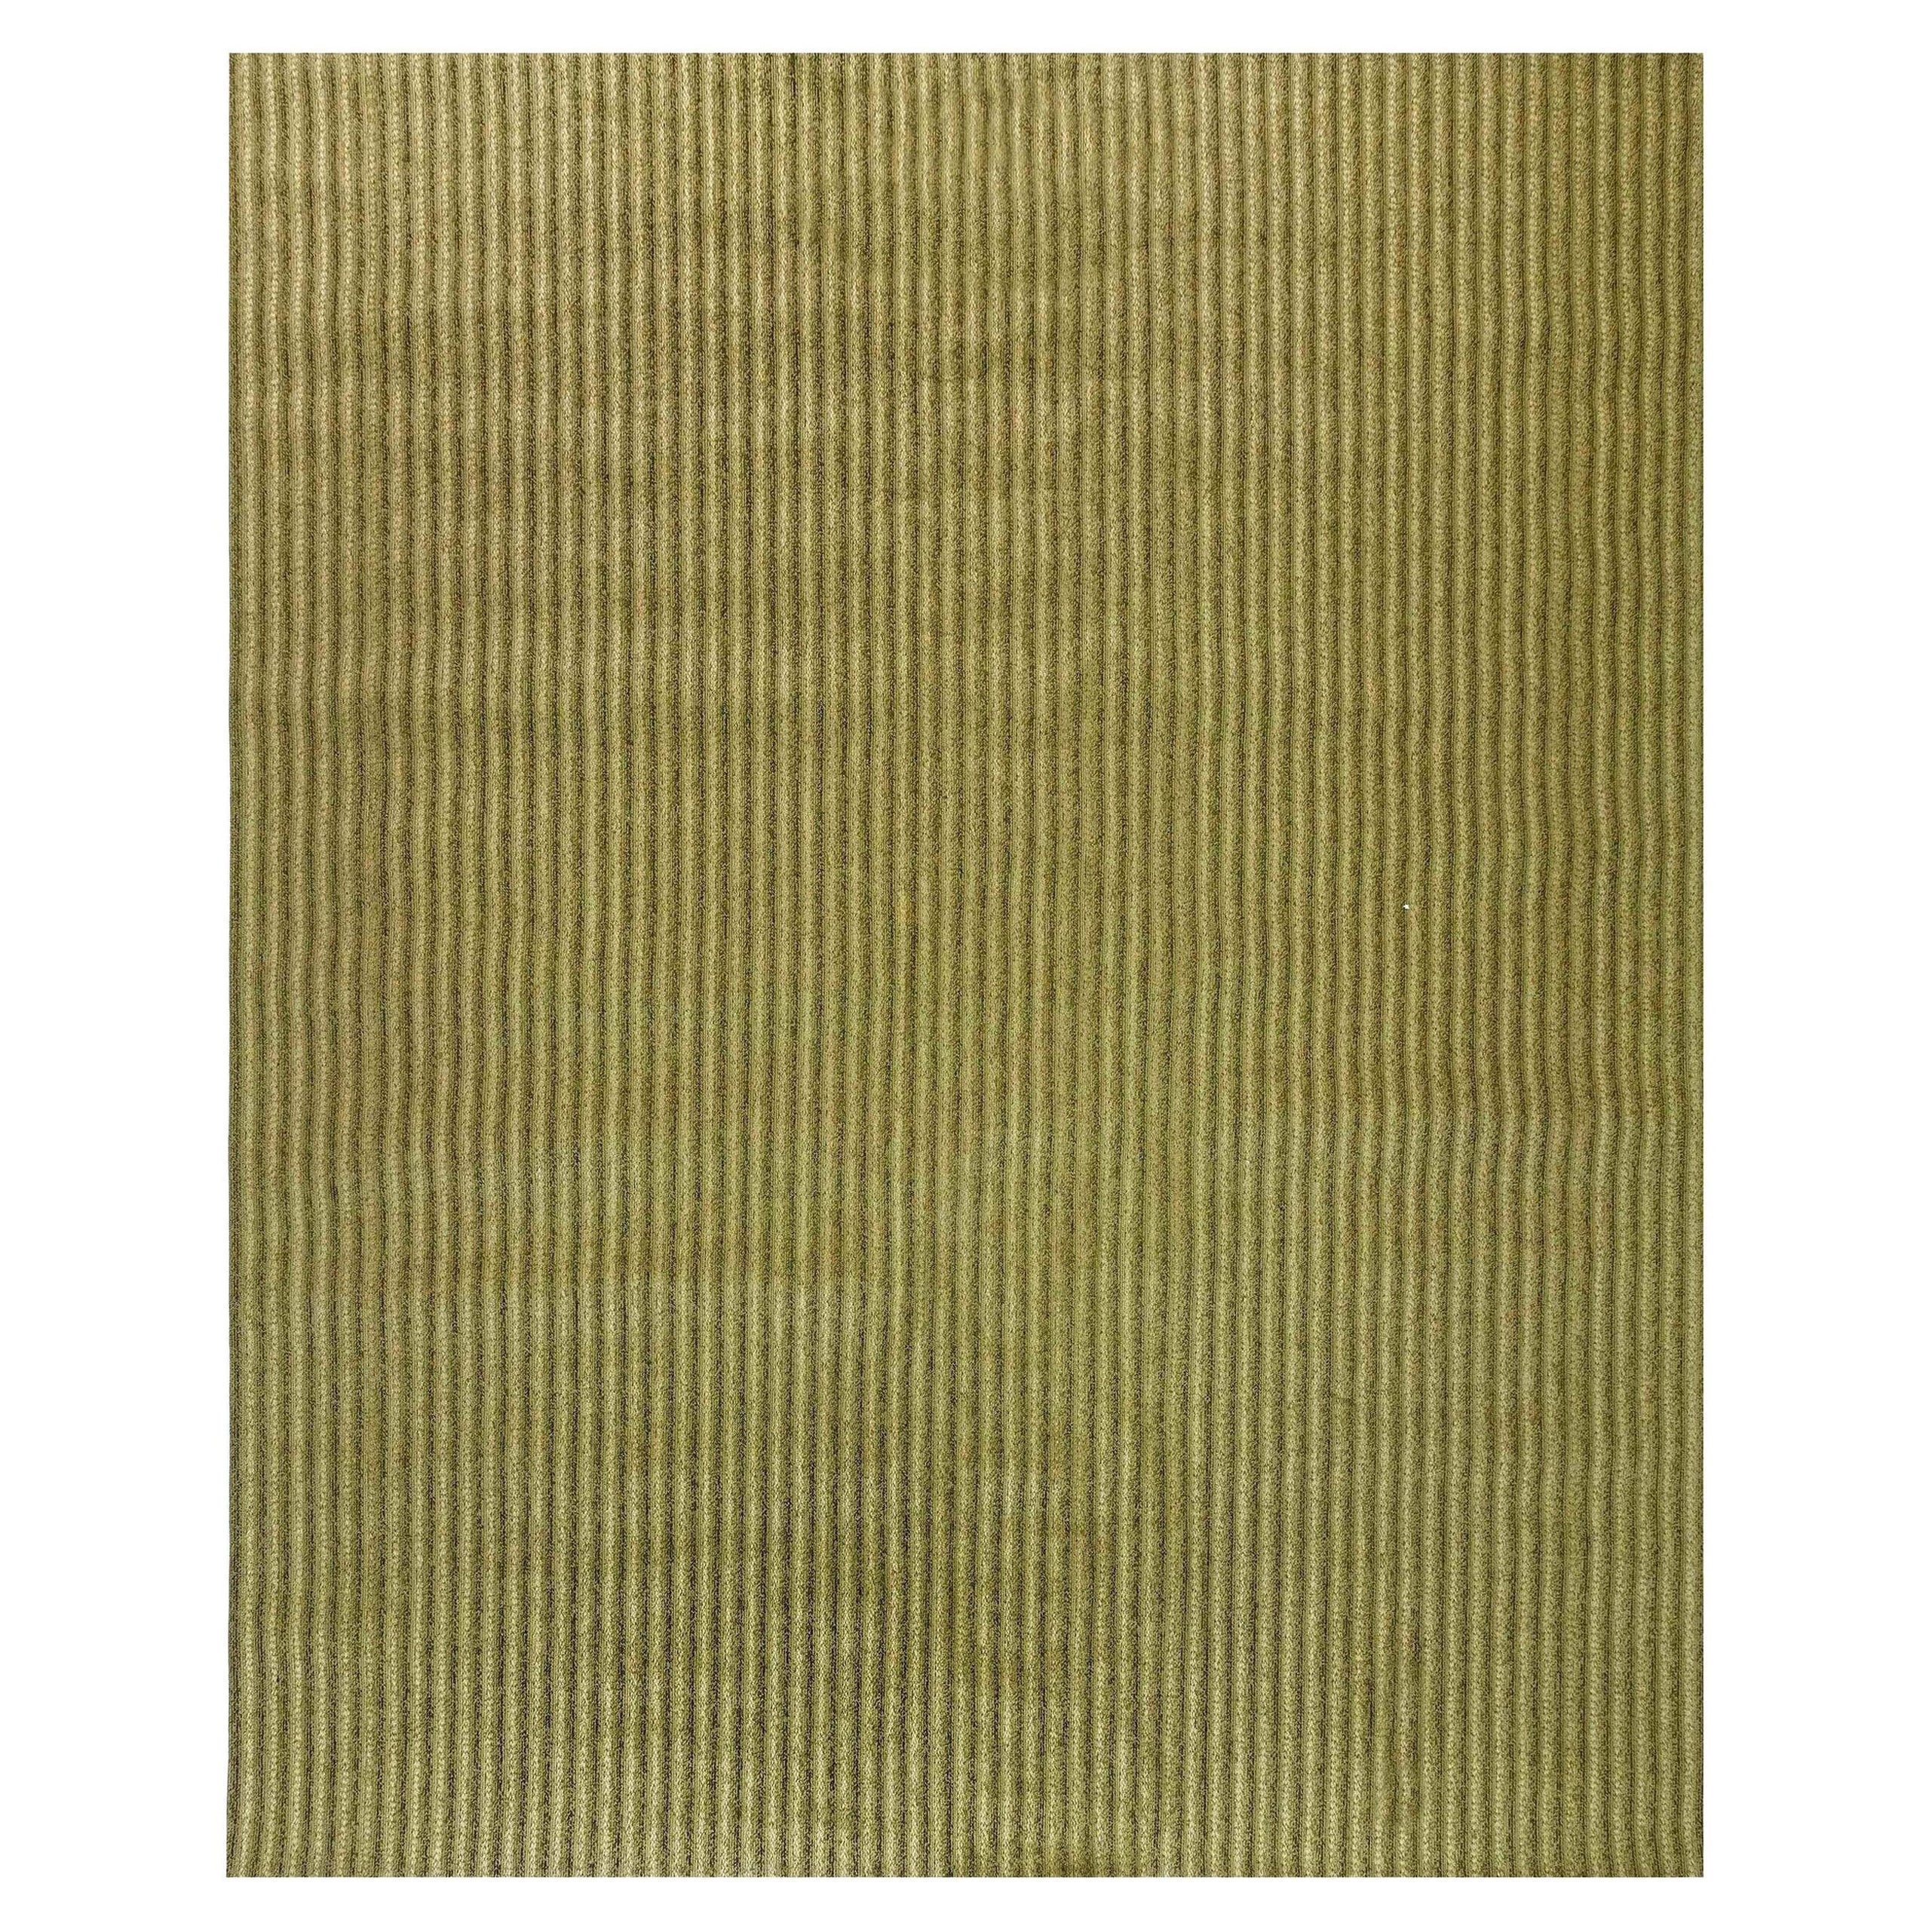 Contemporary Striped Twisted Belts Leather Rug by Doris Leslie Blau